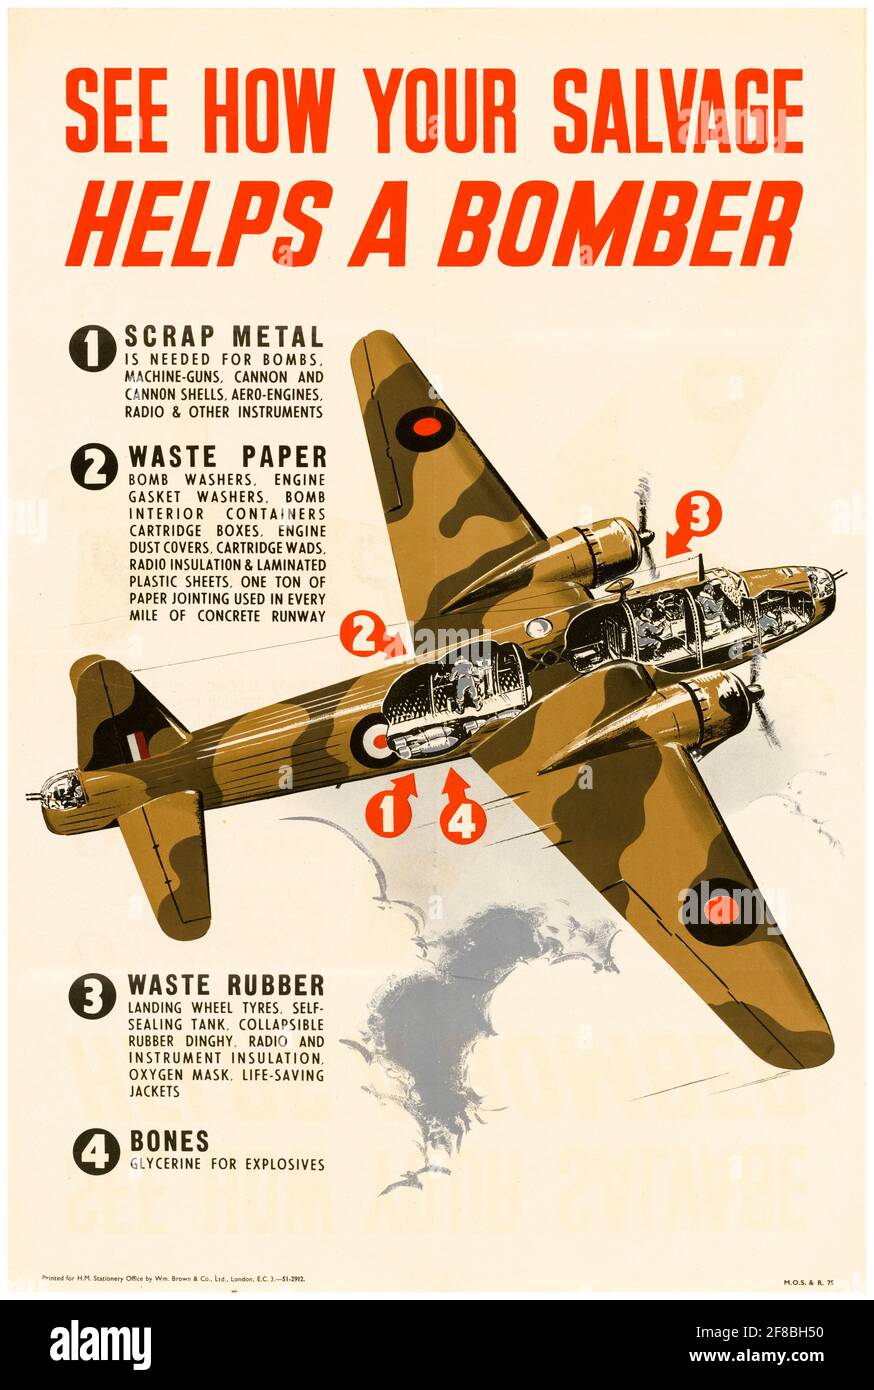 British, WW2 Recycling poster, See How your Salvage Helps a Bomber, 1942-1945 Stock Photo